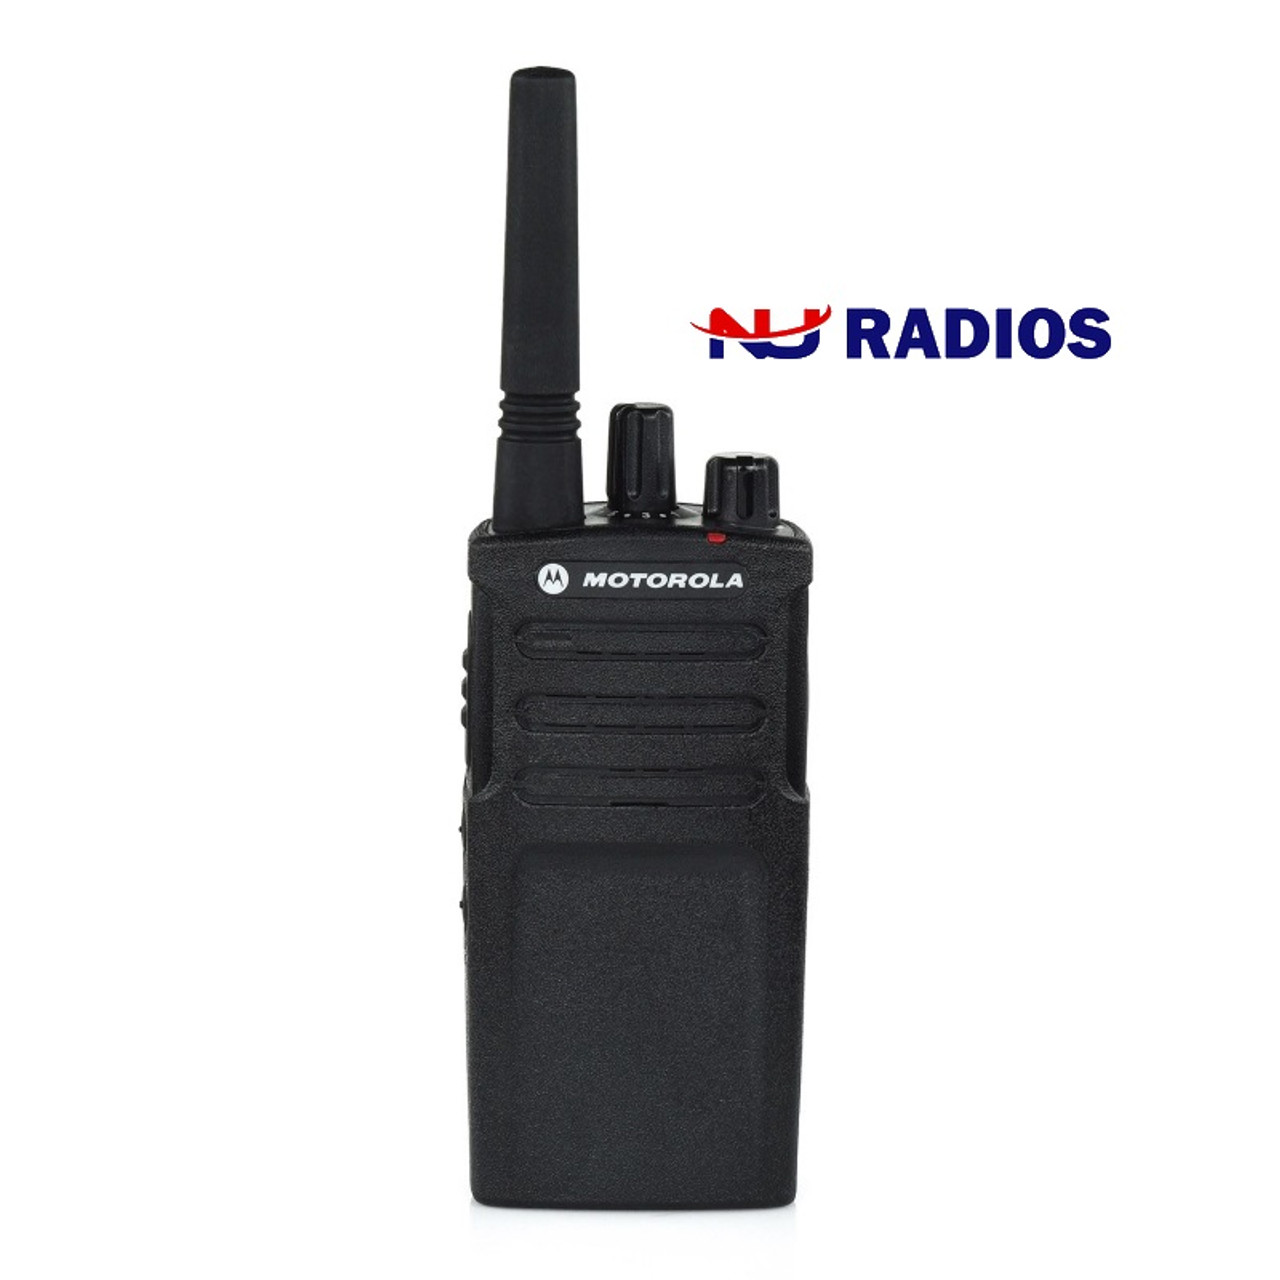 Motorola RMU2080 with NOAA is the work horse of most warehouse and retail  stores that want an easy to use radio that is durable